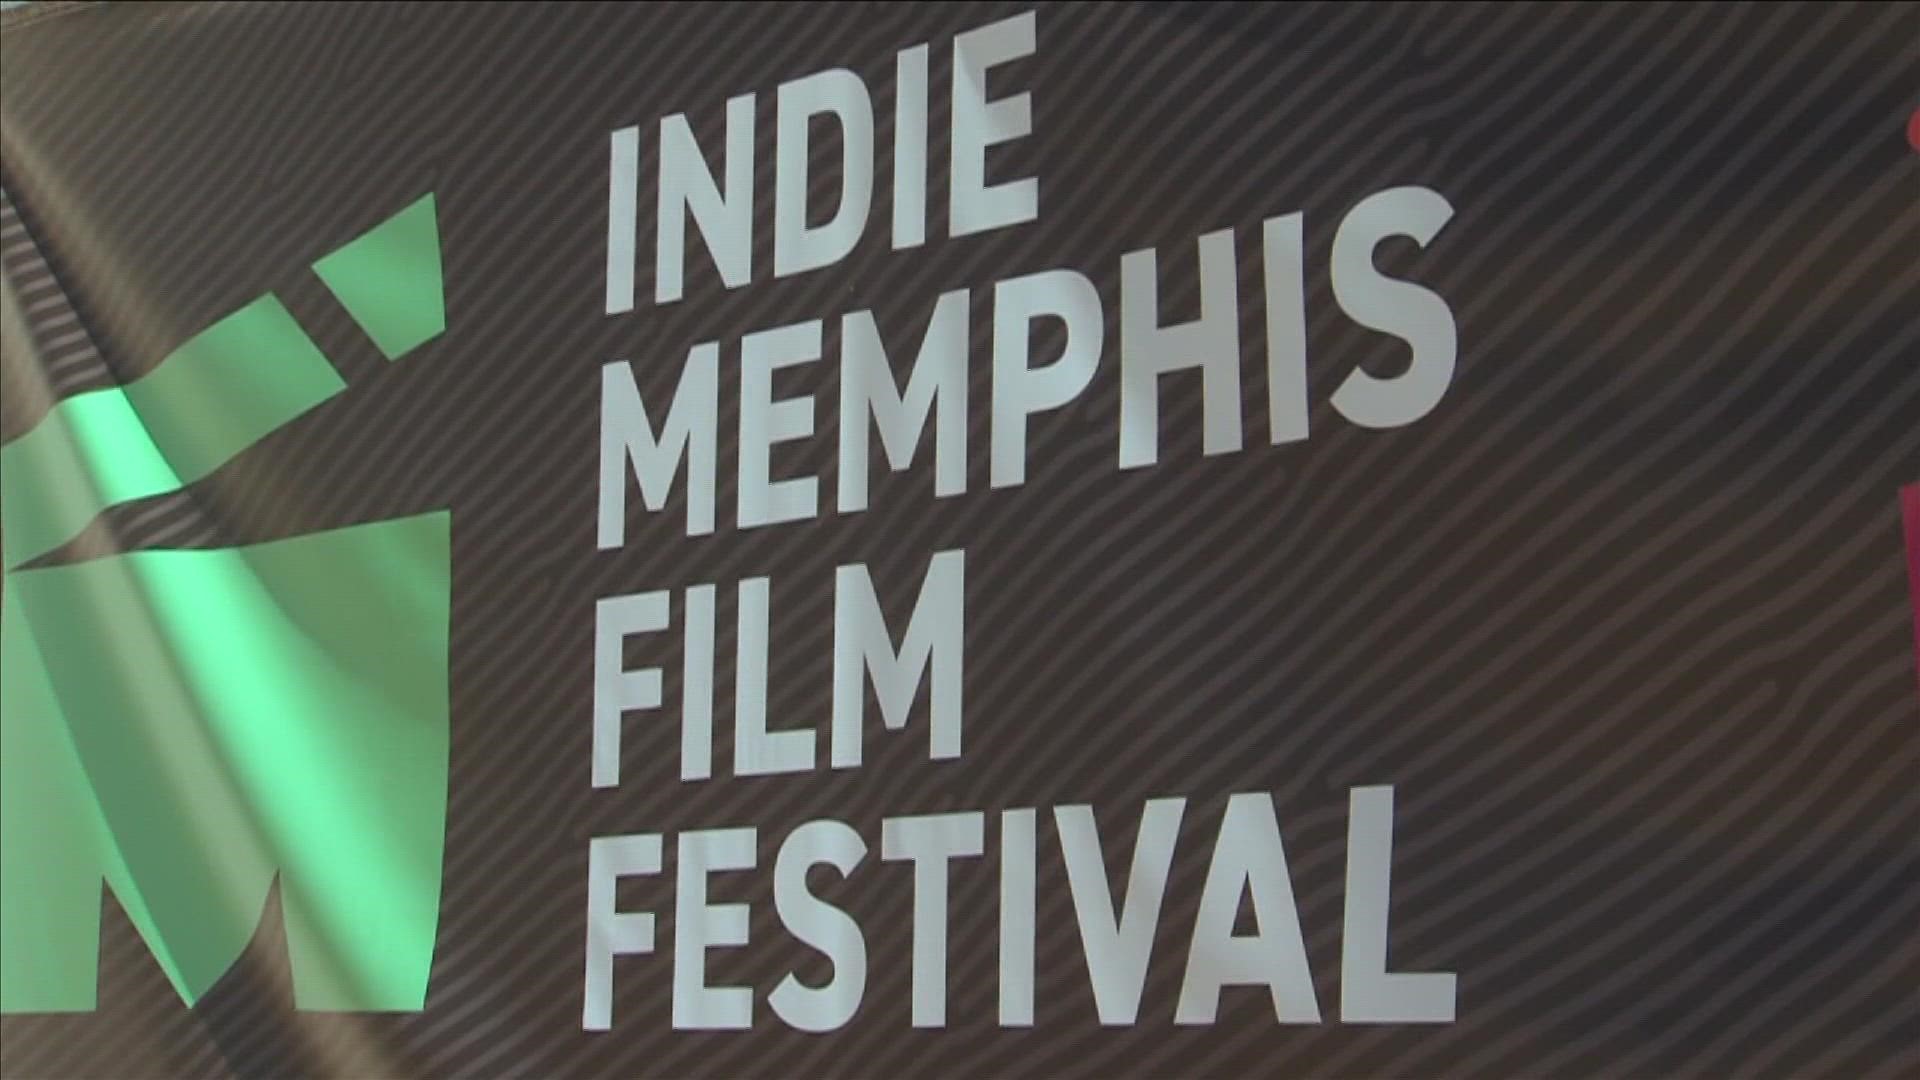 Indie Memphis Film Festival 2022 will highlight Memphis film with documentaries like "50 for Da City" and "The 'Vous".